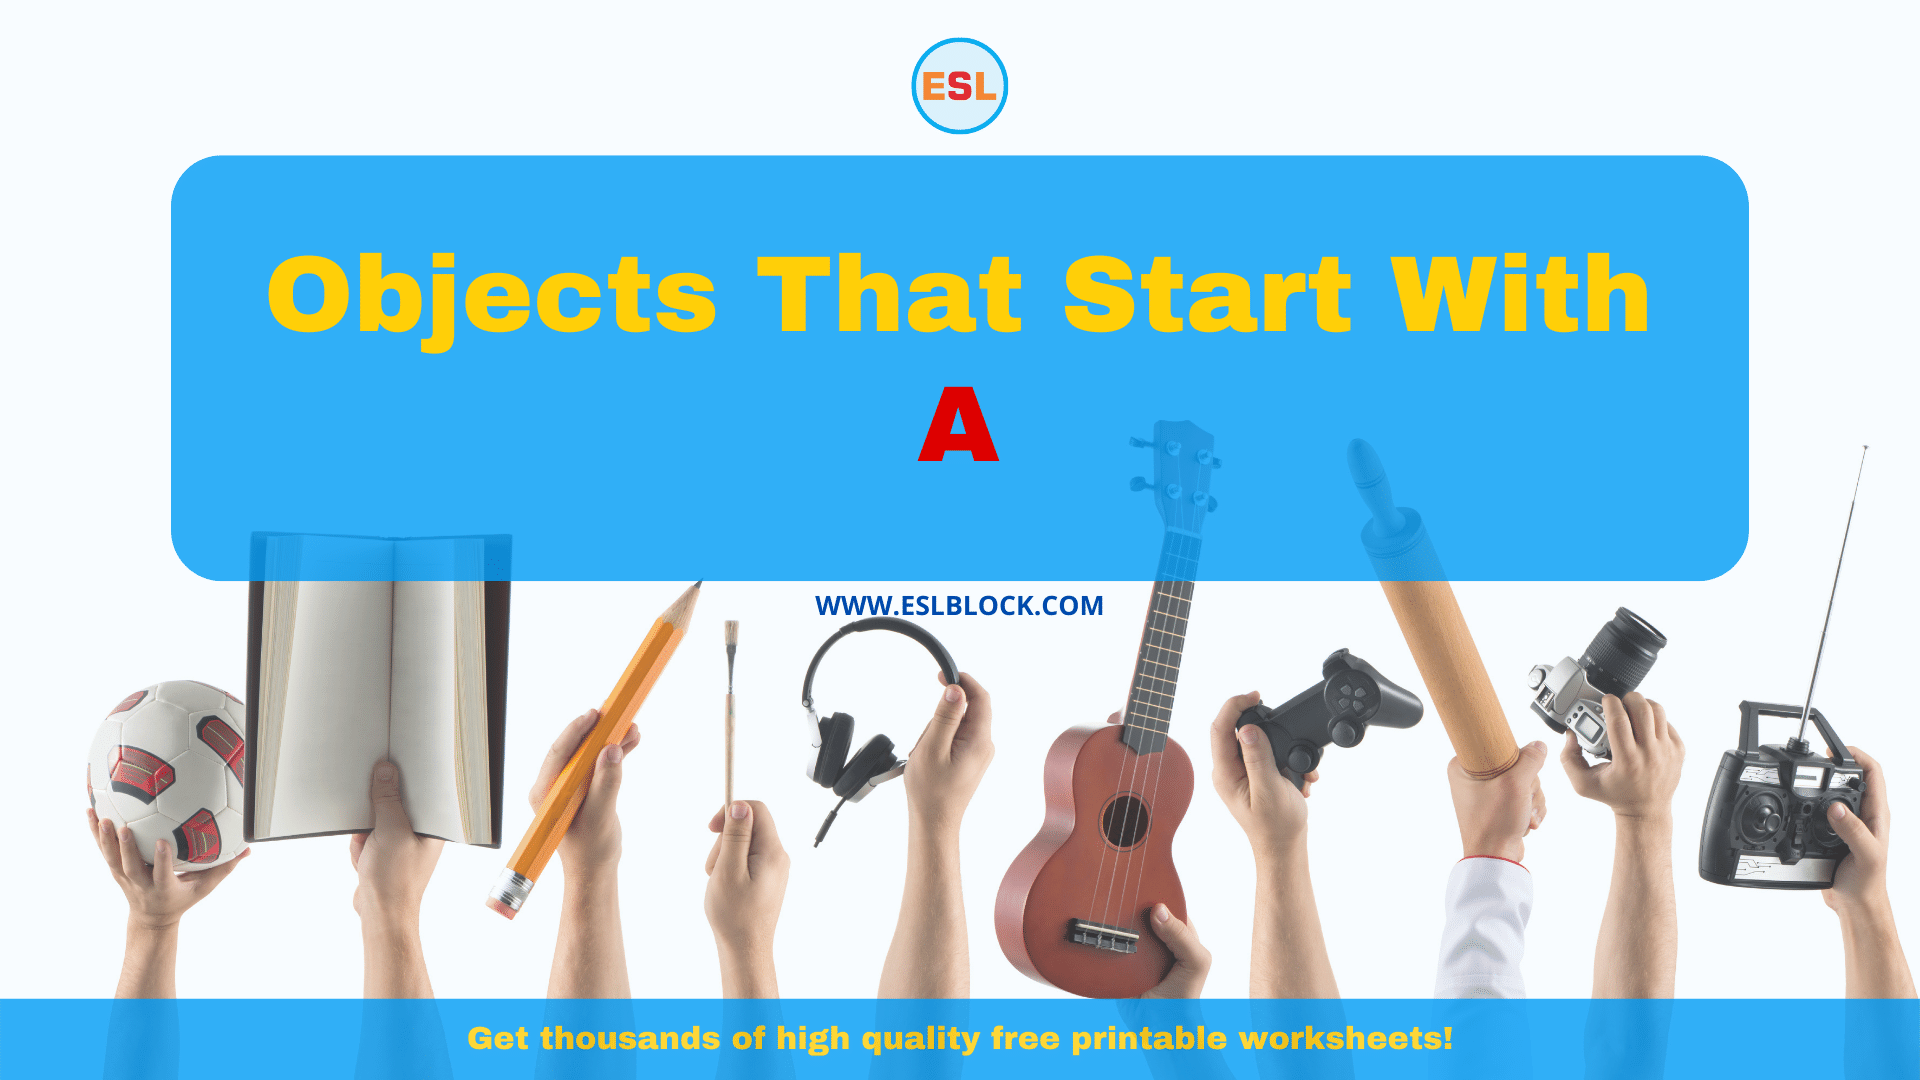 5 Letter Objects Starting With A, A Objects, A Objects in English, A Objects Names, English, English Nouns, English Vocabulary, English Words, List of Objects That Start With ZZ, Nouns, Objects List, Objects That Start With A, Things Names, Vocabulary